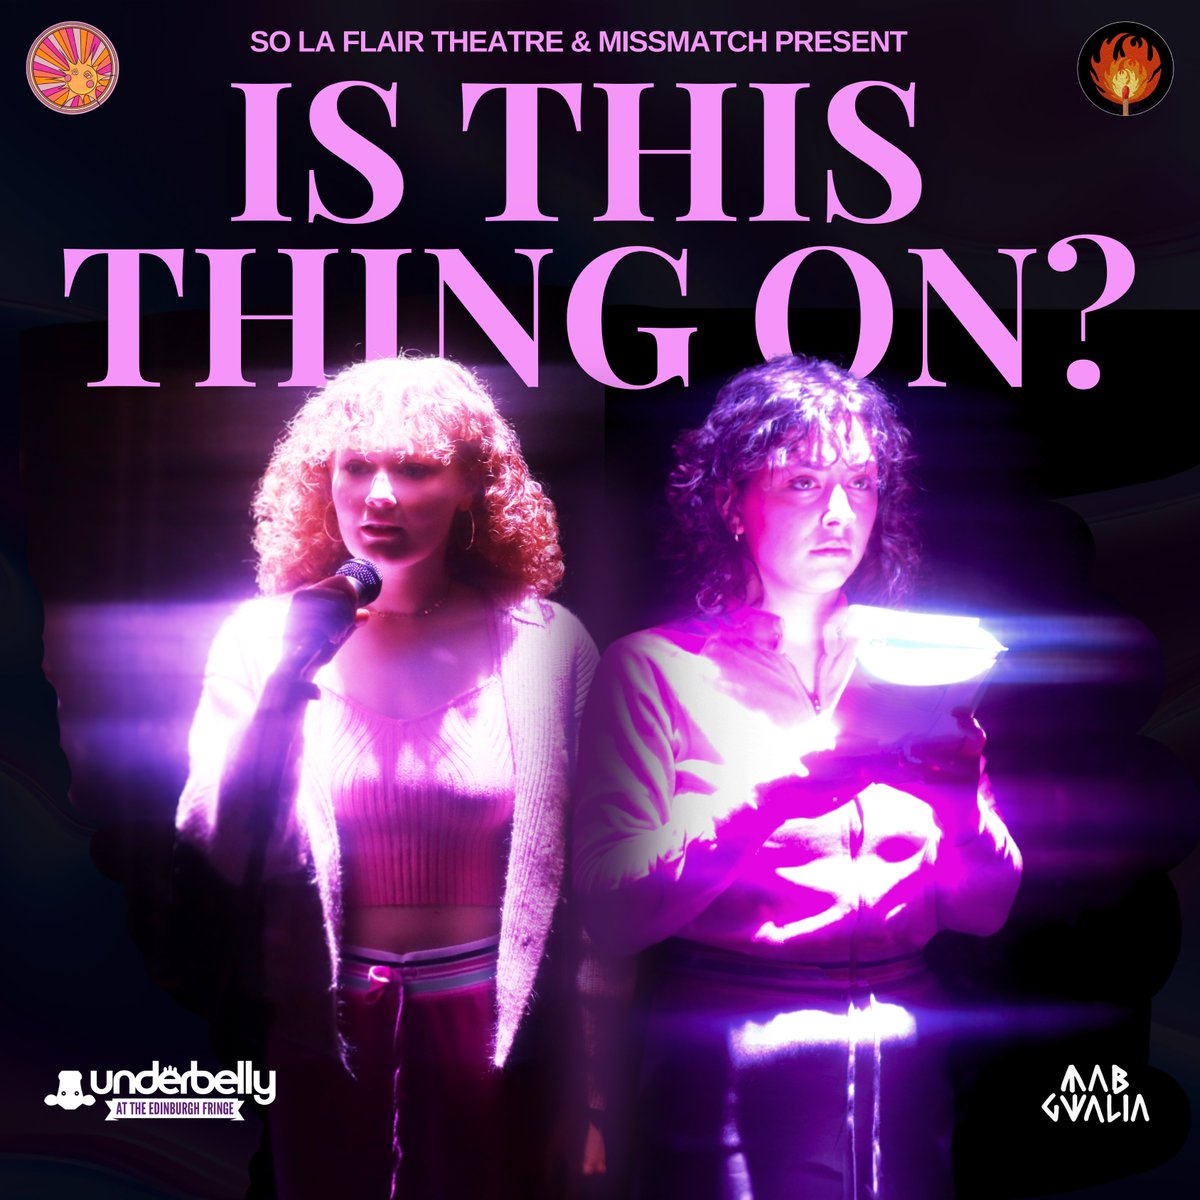 Beyond excited to announce that our incredible Northern Tour of 'Is This Thing On?' will not be the end of this beautiful show’s life … New Journey, Next Chapter: Venturing to the Edinburgh Festival Fringe, with support from Mab Gwalia, to @FollowTheCow 💋✨ @MissMatch133548 x